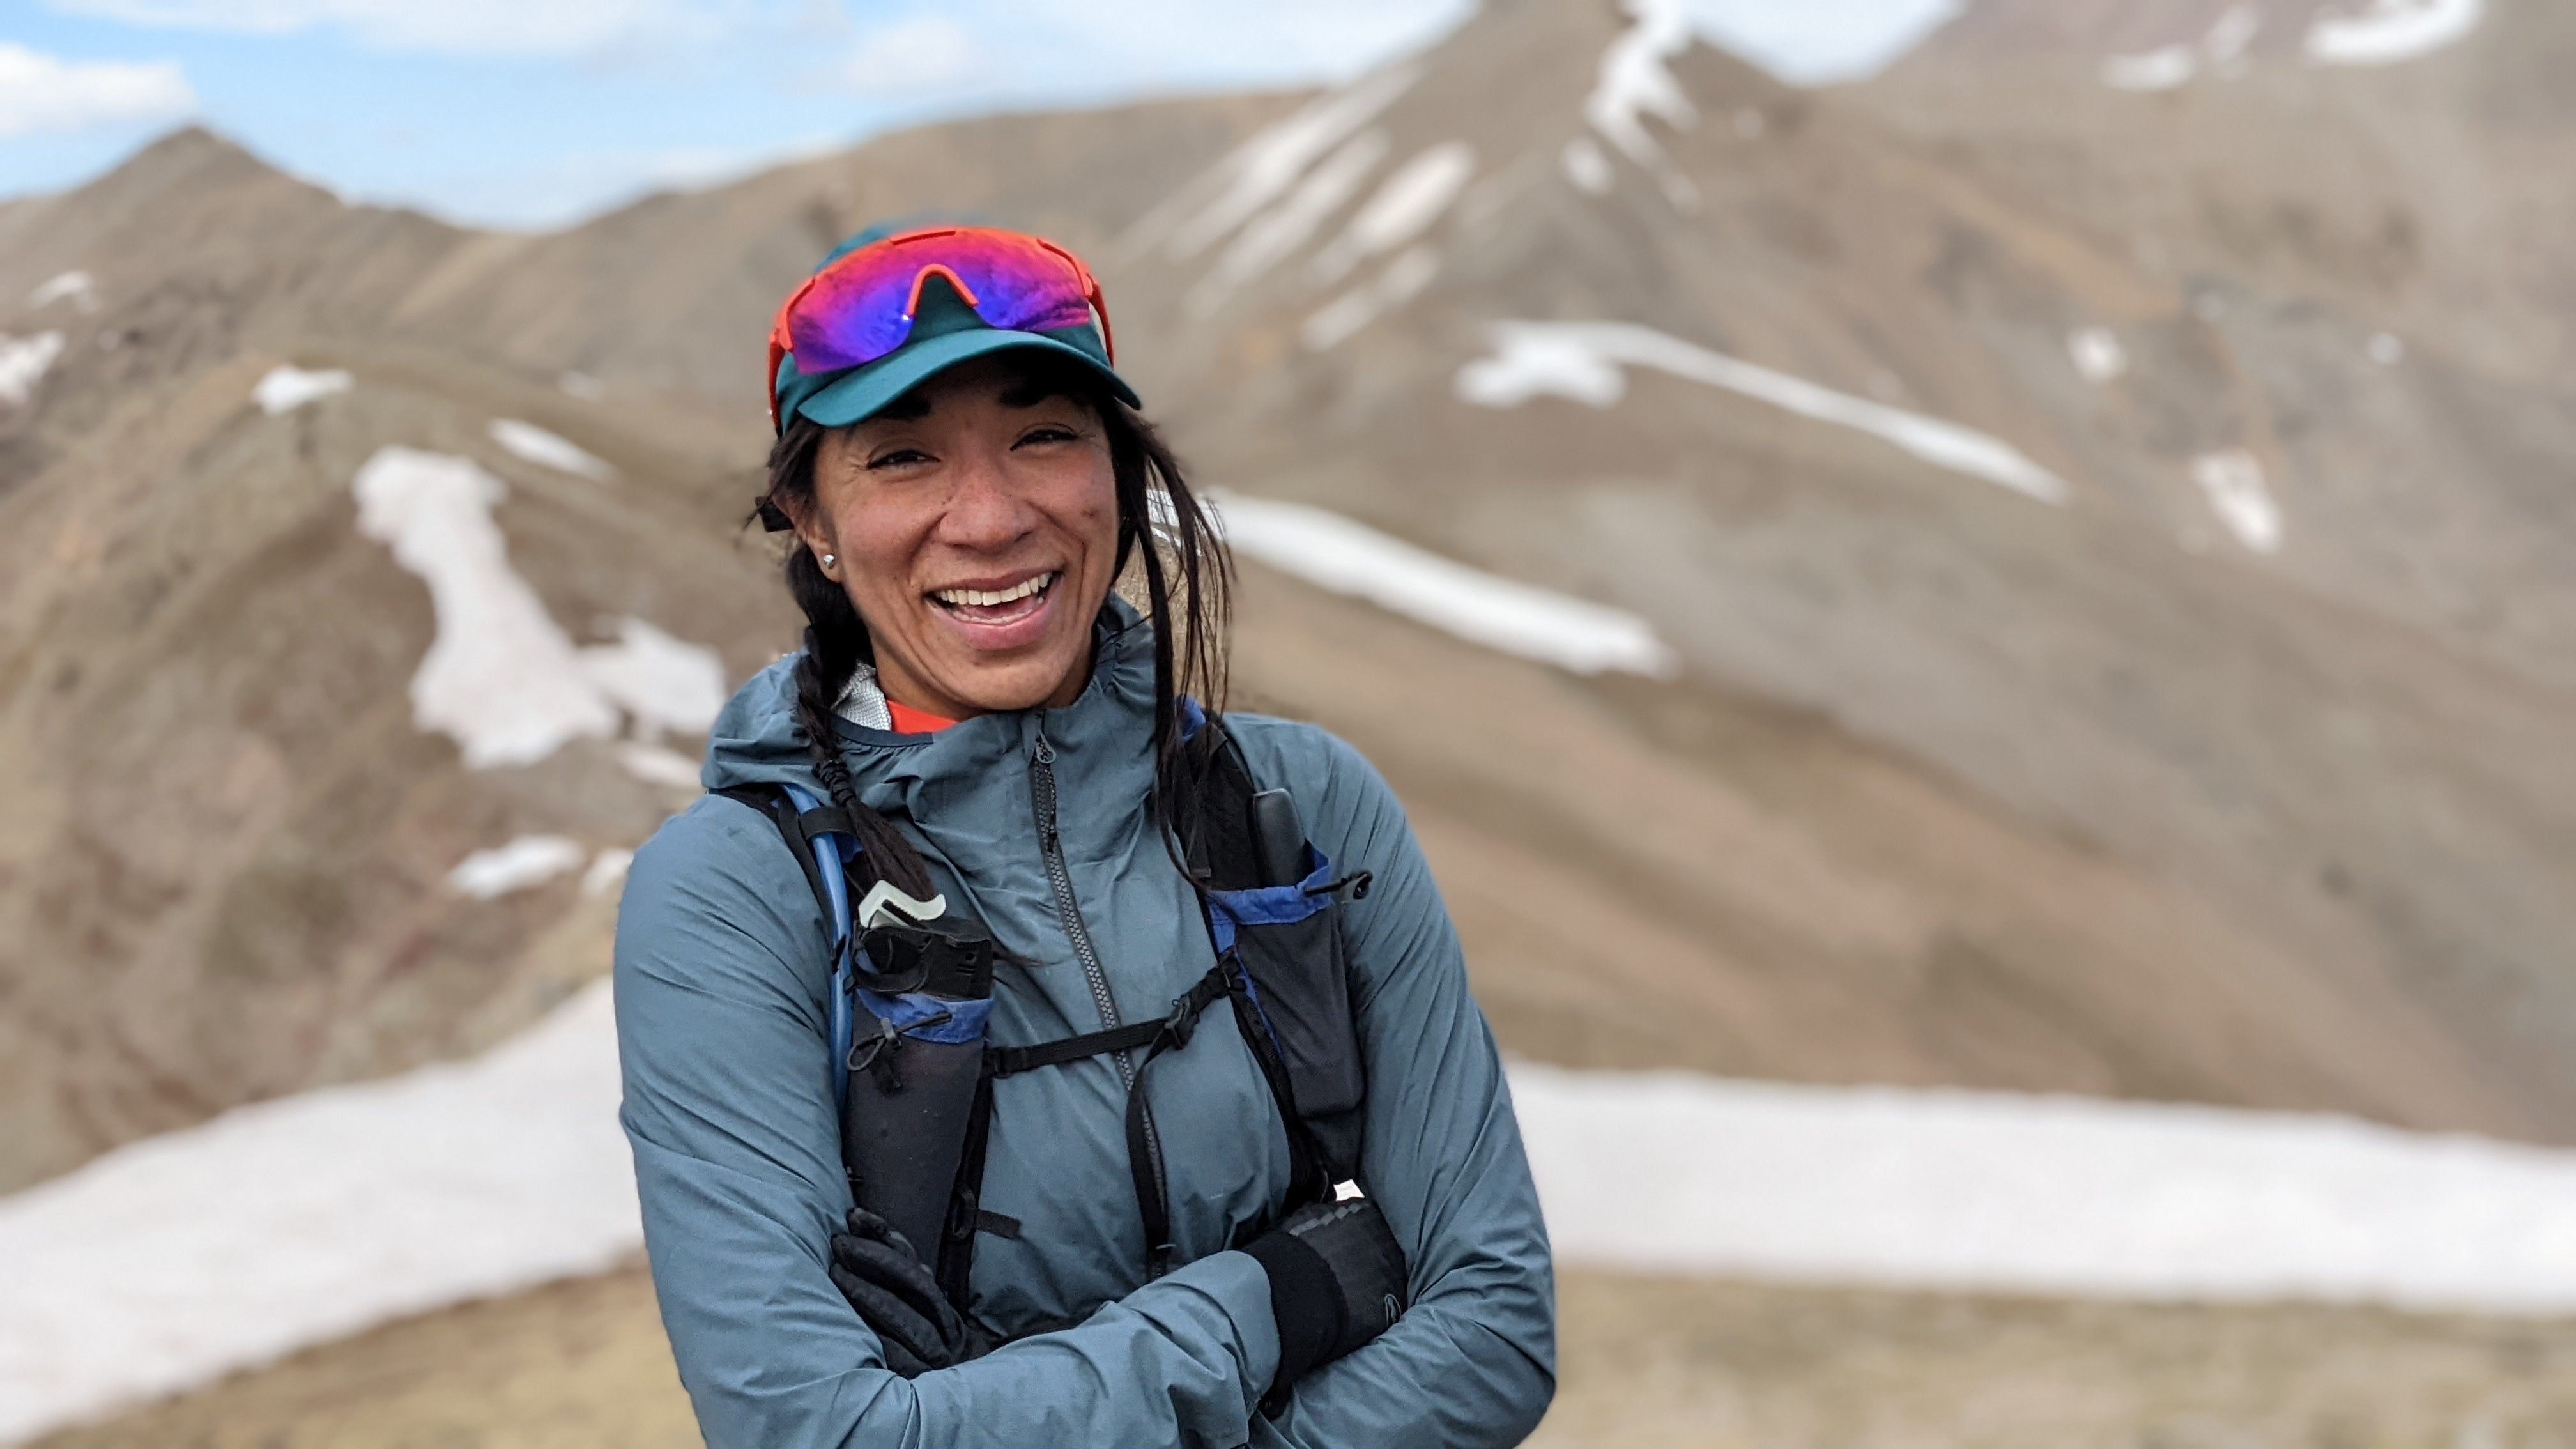 Dani Reyes-Acosta: Not Lost, Just Discovering